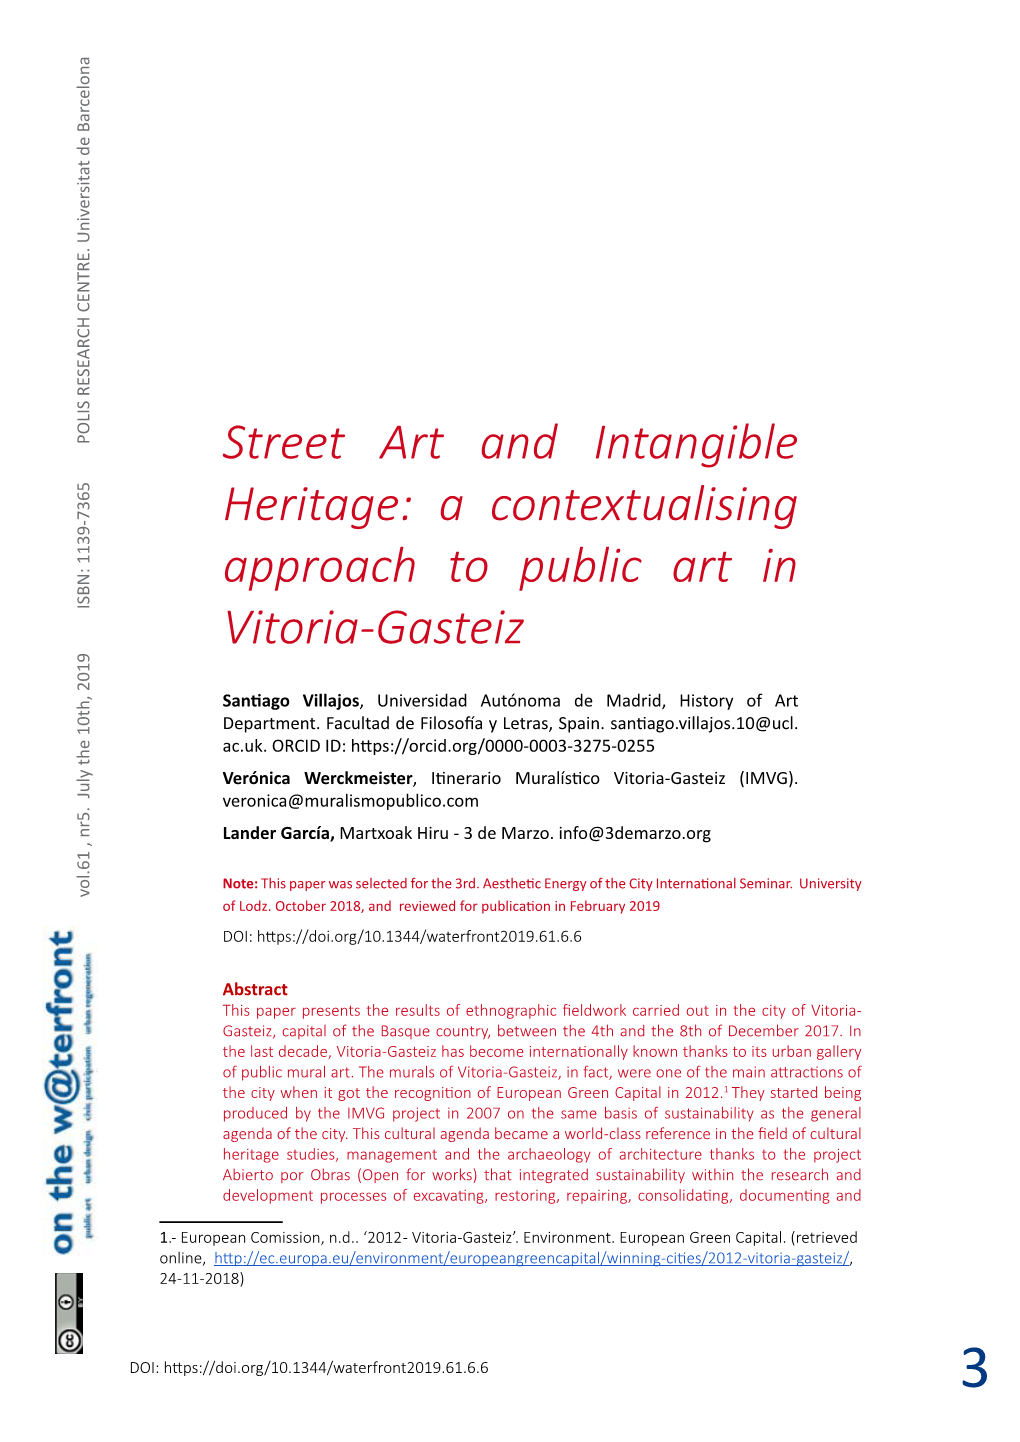 Street Art and Intangible Heritage